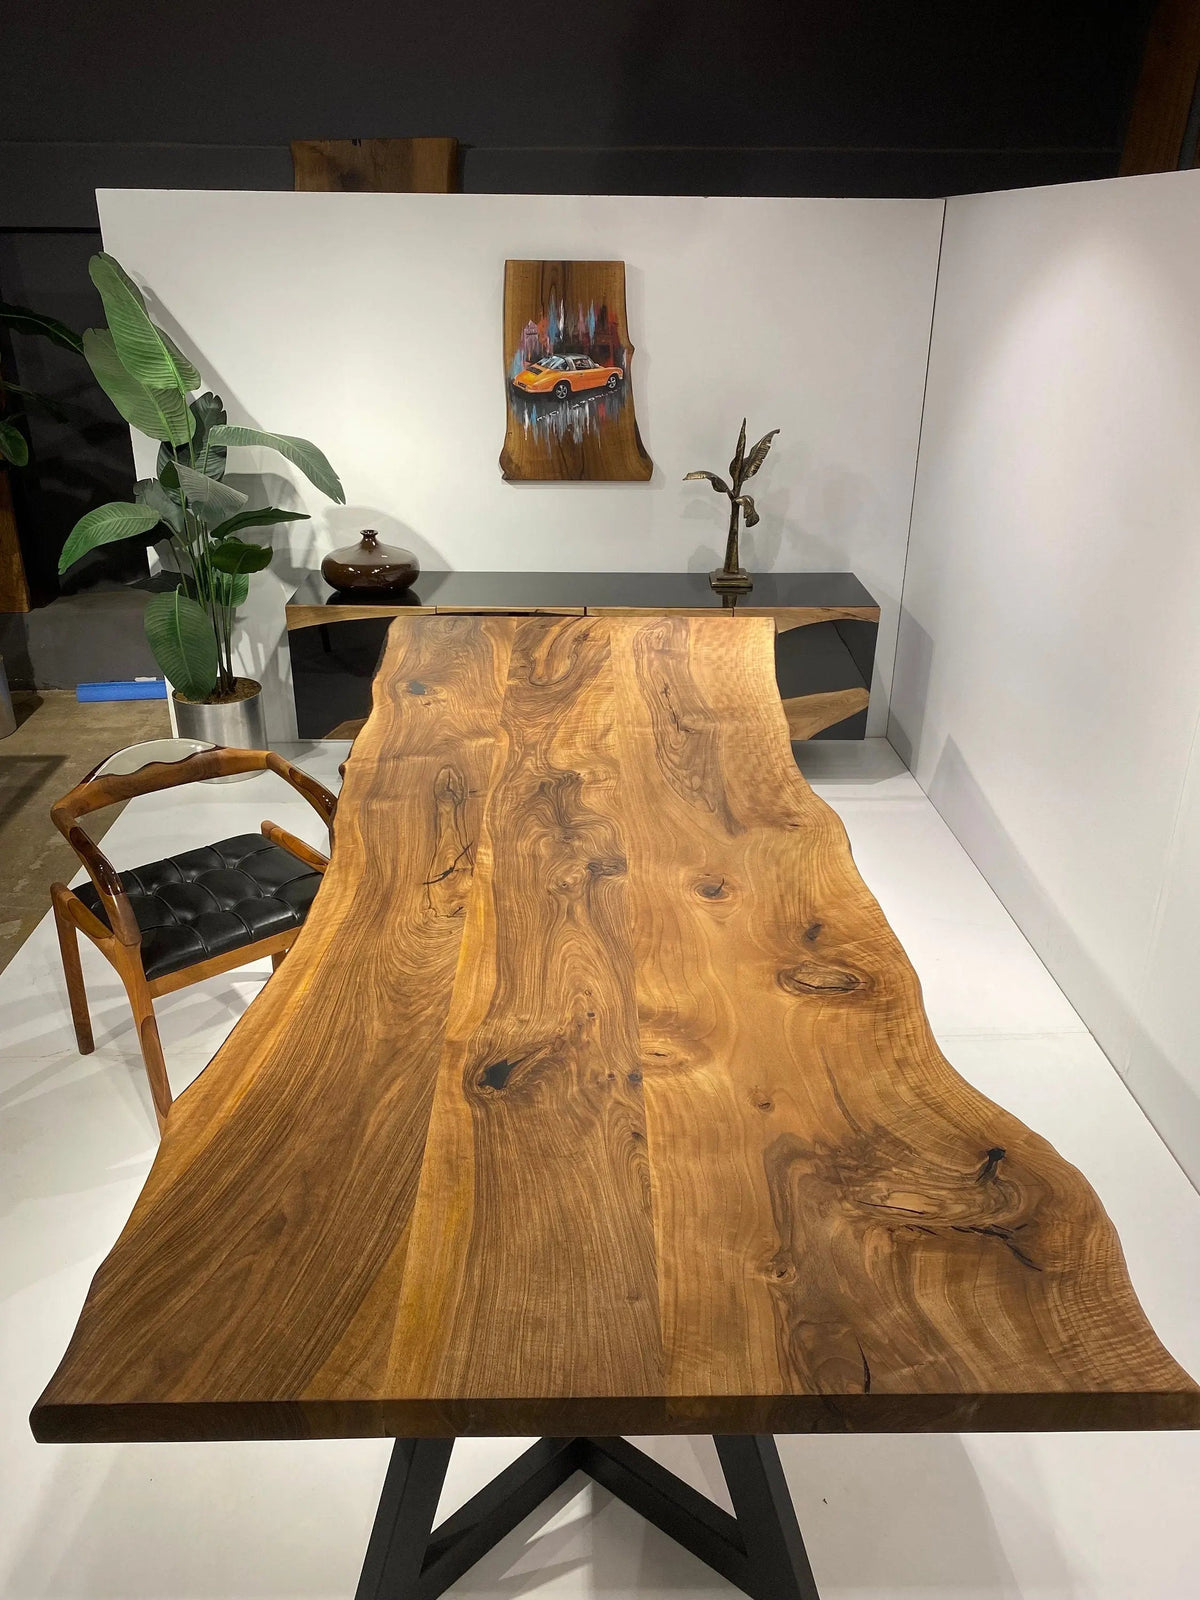 Walnut Kitchen Table | Natural Wooden Dininig Table | Living Room Table On Wooden